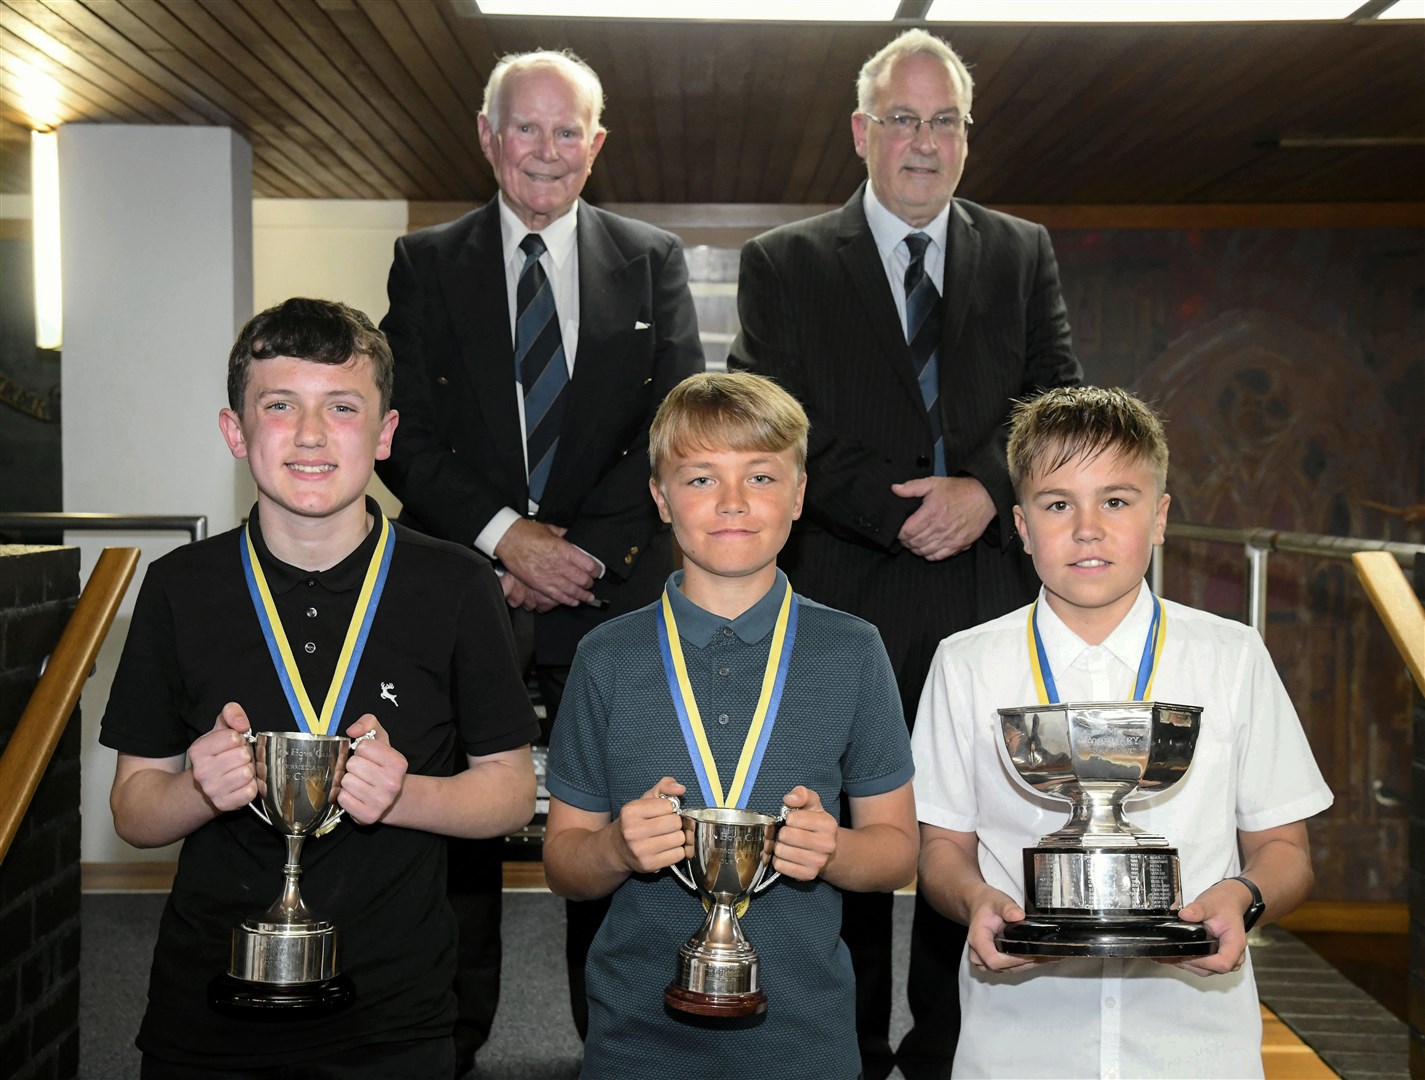 Mike Christie (Honorary President) and Neil Fotheringham (Secretary) along with the Intermediate winners: St Giles, Royal and Corinthians at an Elgin Boys Club Presentation at Elgin Town Hall.